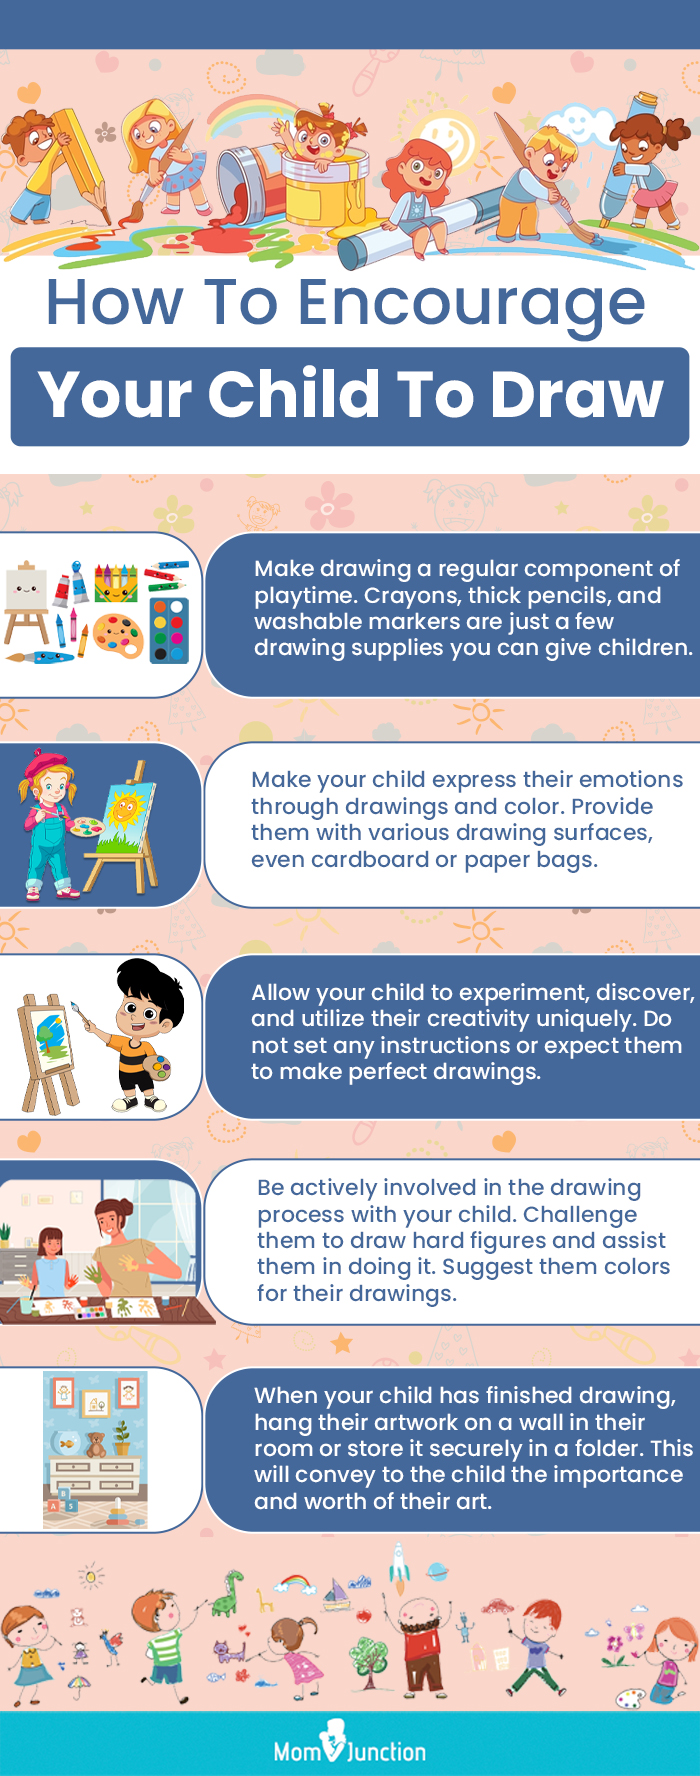 Drawing Development in Children: The Stages from 0 to 17 Years